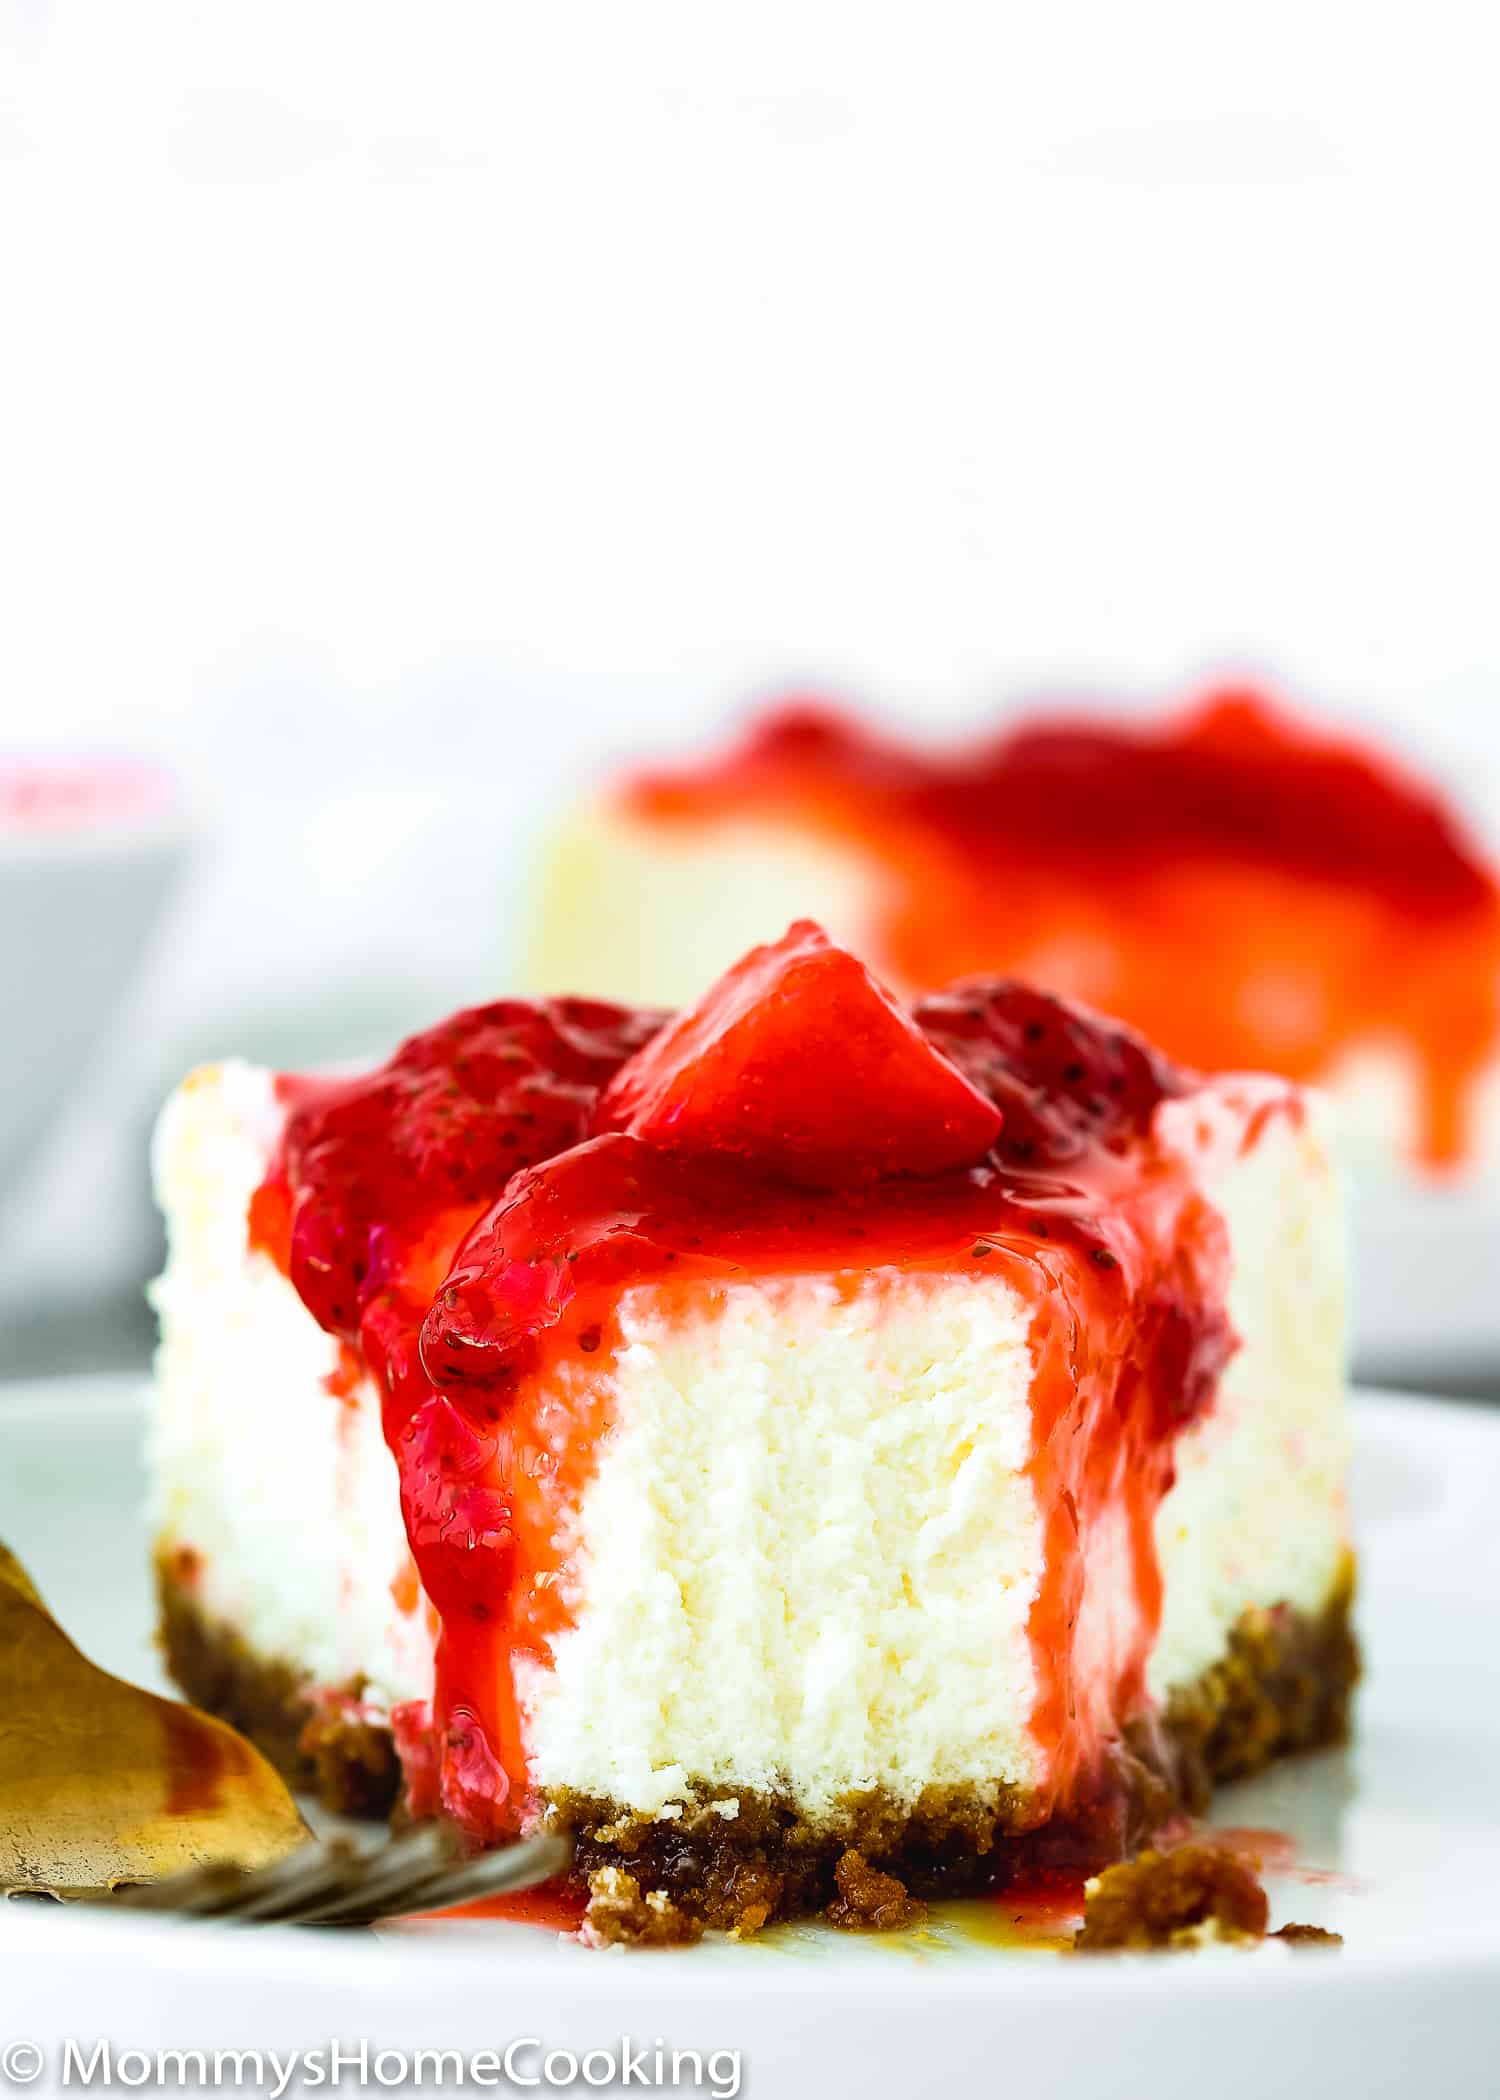 slice of eggless cheesecake cover with strawberry sauce/topping.